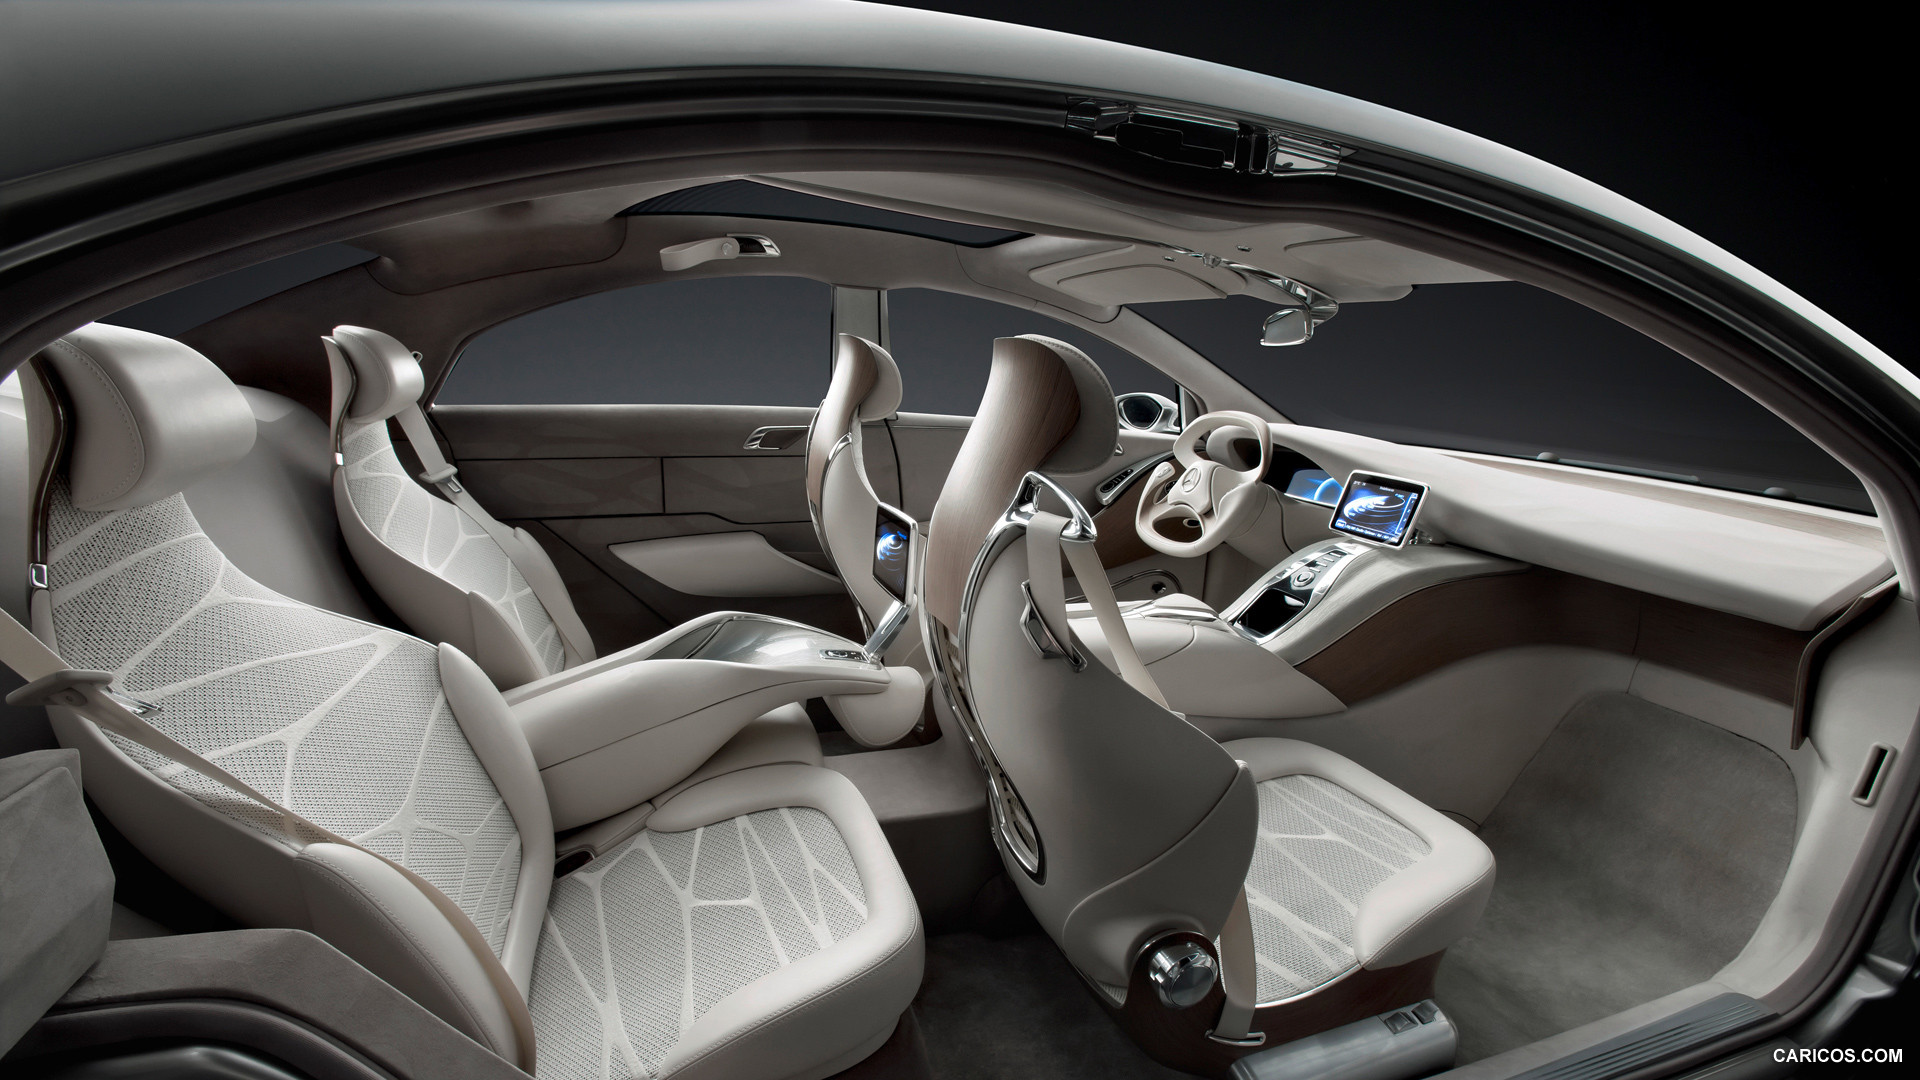 Mercedes-Benz F800 Style Concept (2010)  - Interior, #55 of 120